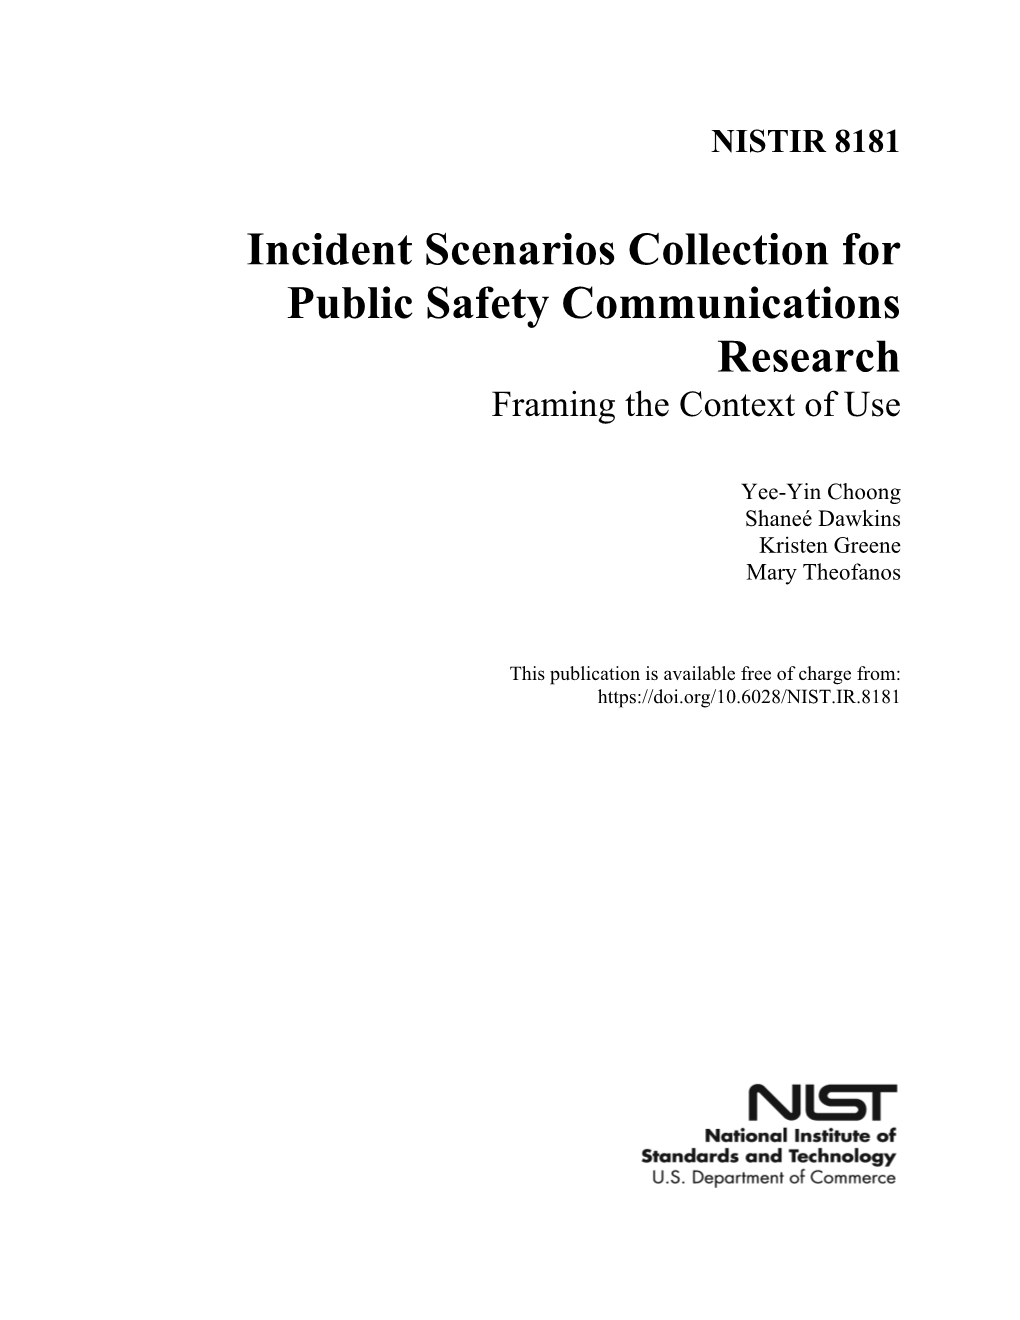 Incident Scenarios Collection for Public Safety Communications Research Framing the Context of Use